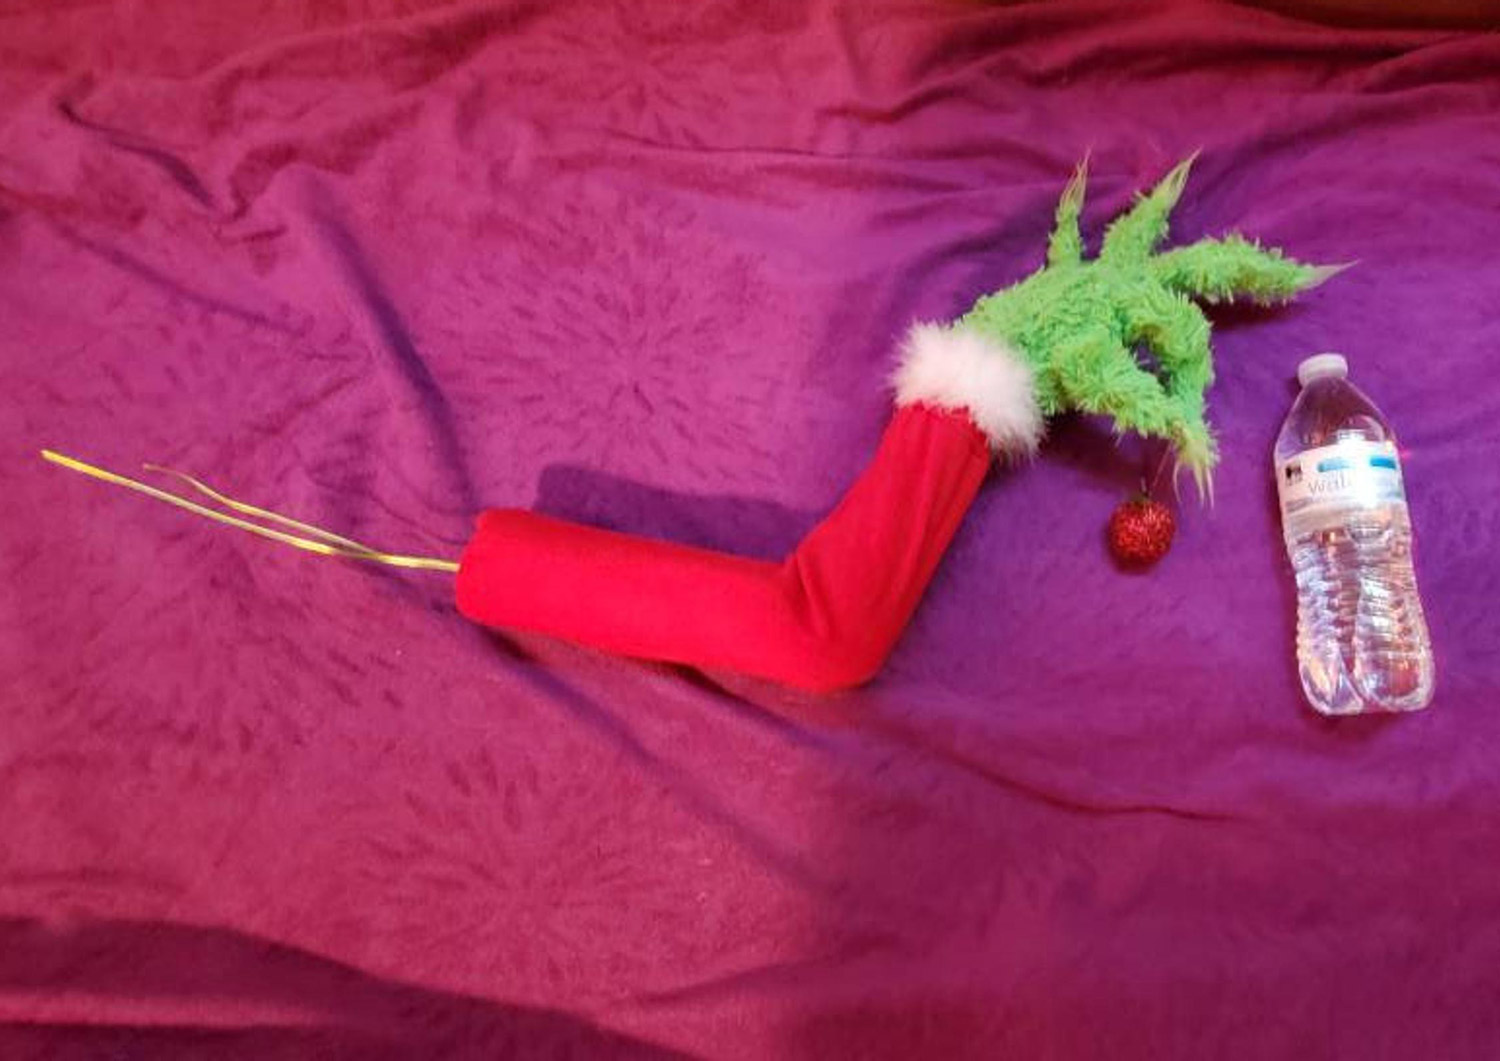 Details about  / Grinch Decorations Furry Green Grinch Arm Head Ornament Holder Tree